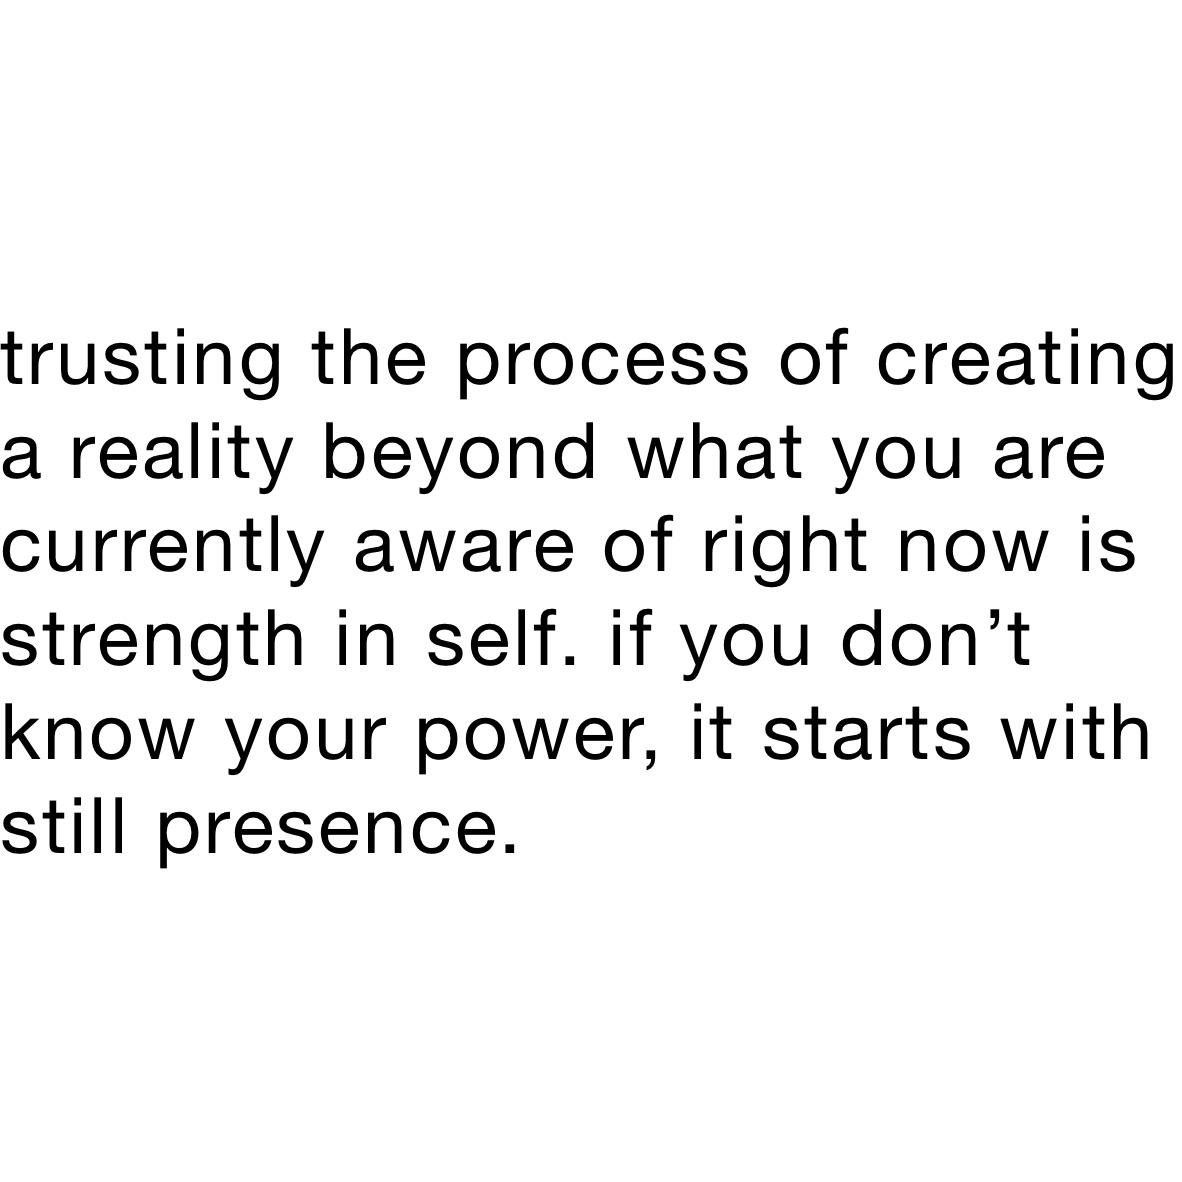 trusting the process of creating a reality beyond what you are currently aware of right now is strength in self. if you don’t know your power, it starts with still presence.